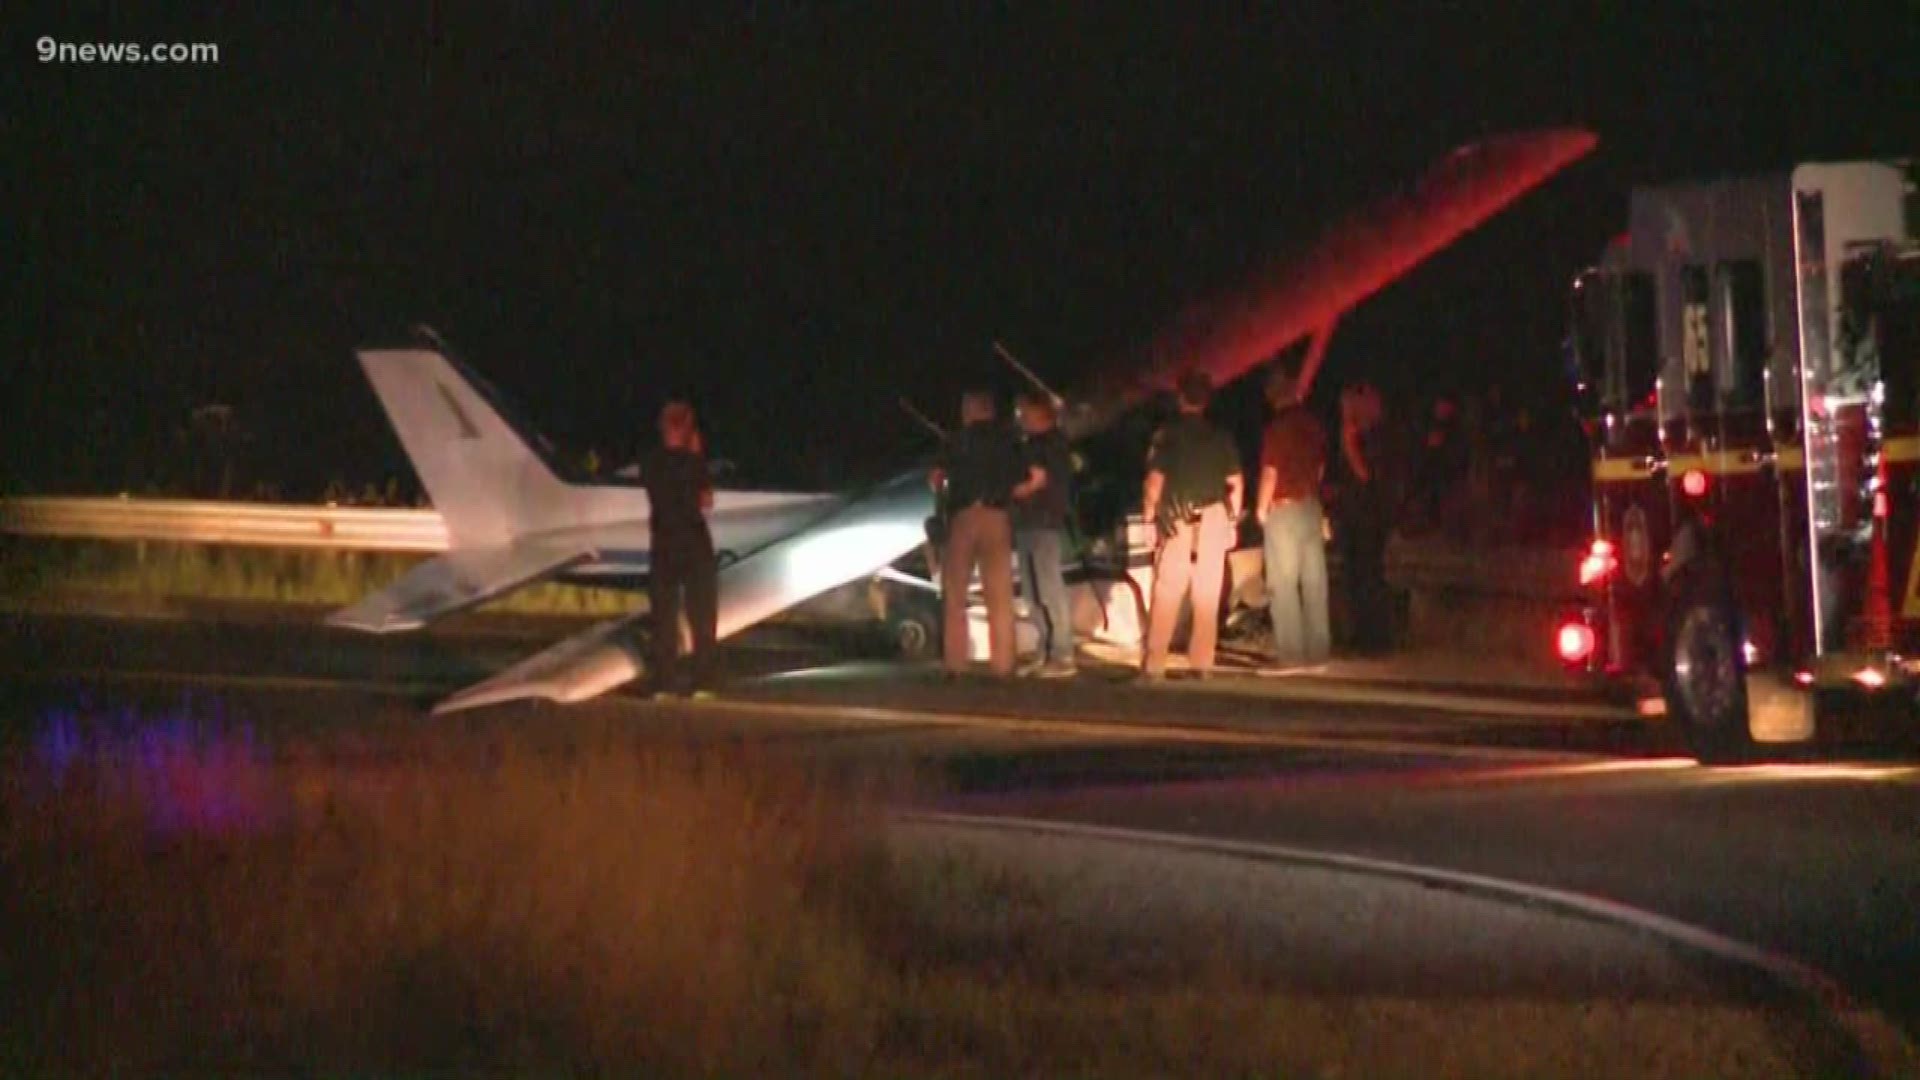 The plane's pilot was taken to the hospital.